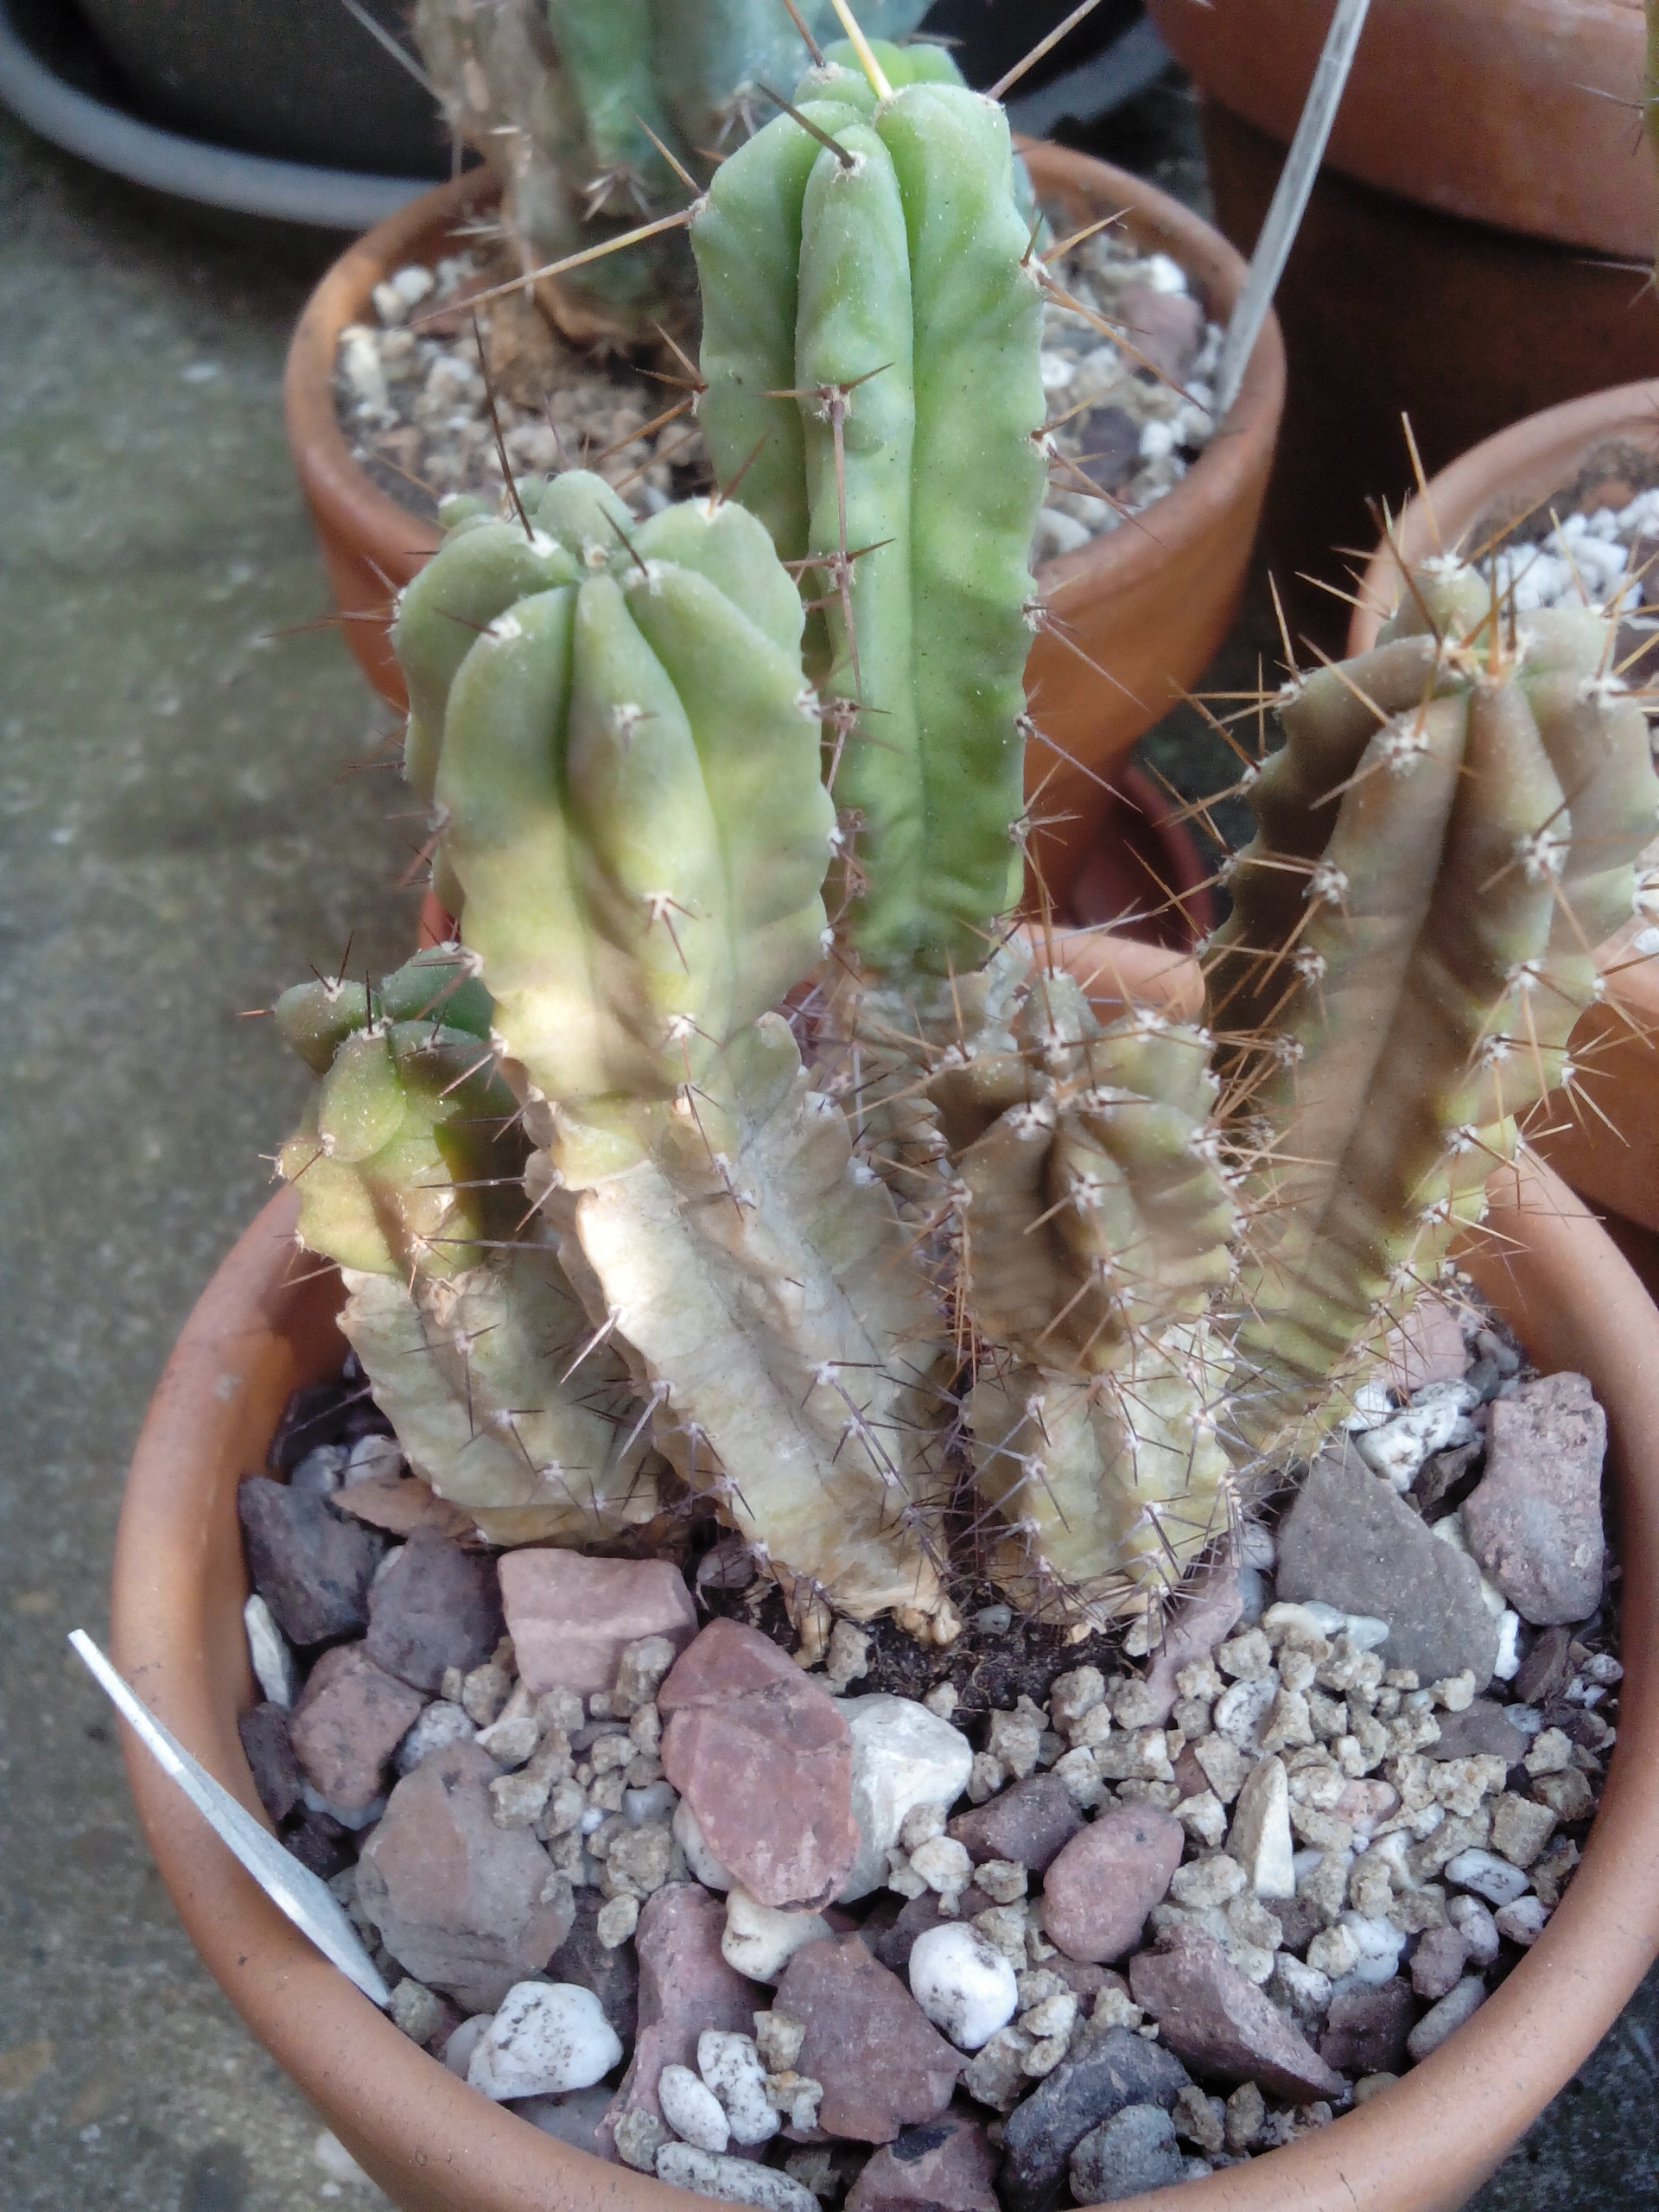 too much or not enough sun? - CactiGuide.com